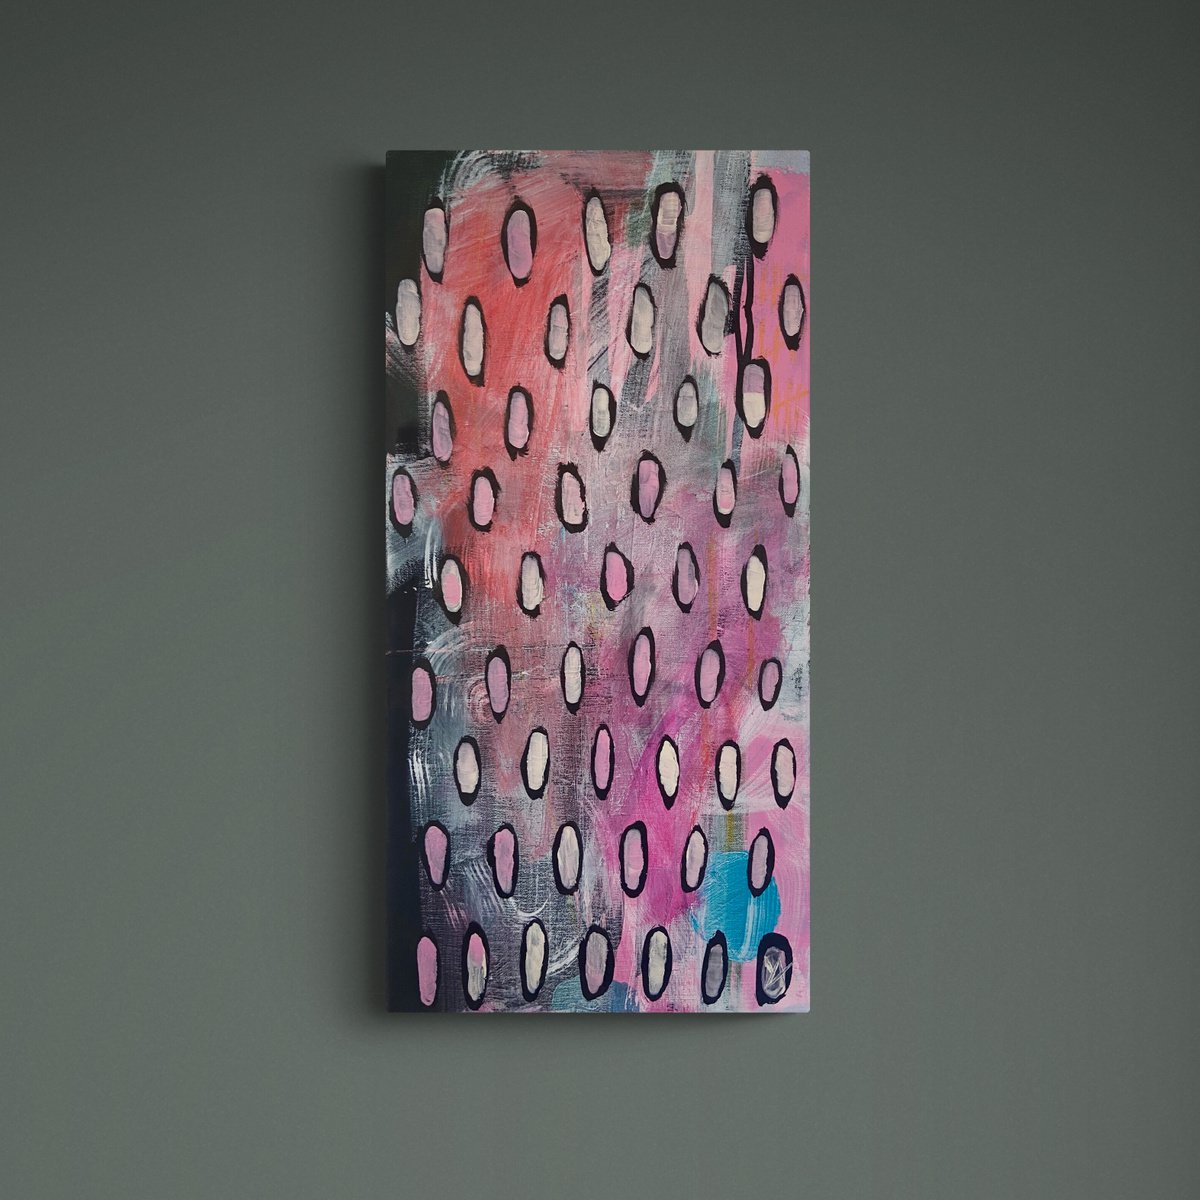 DAILY DOSE- a vertical painting, pink, black and white, circles, modern by Yulia Ani